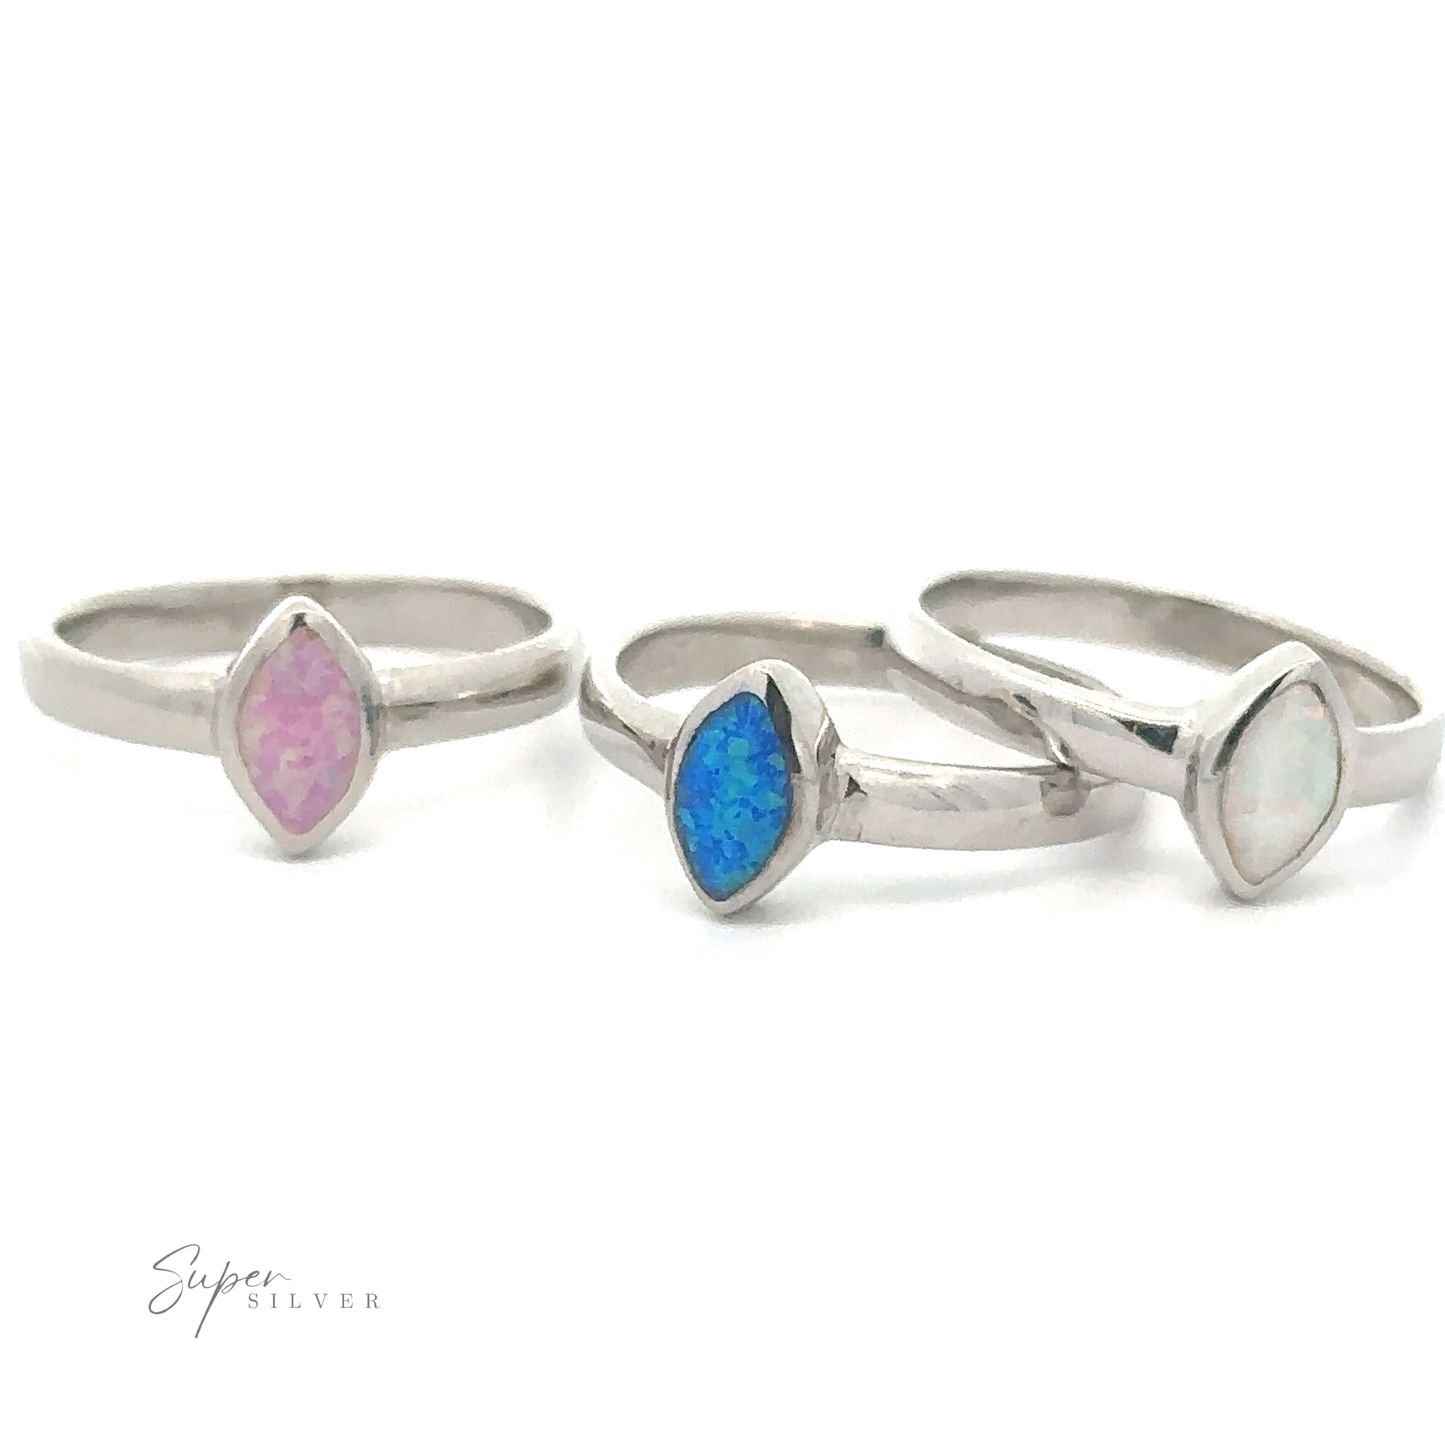 Three silver rings with Simple Marquise Shaped Opal stones.